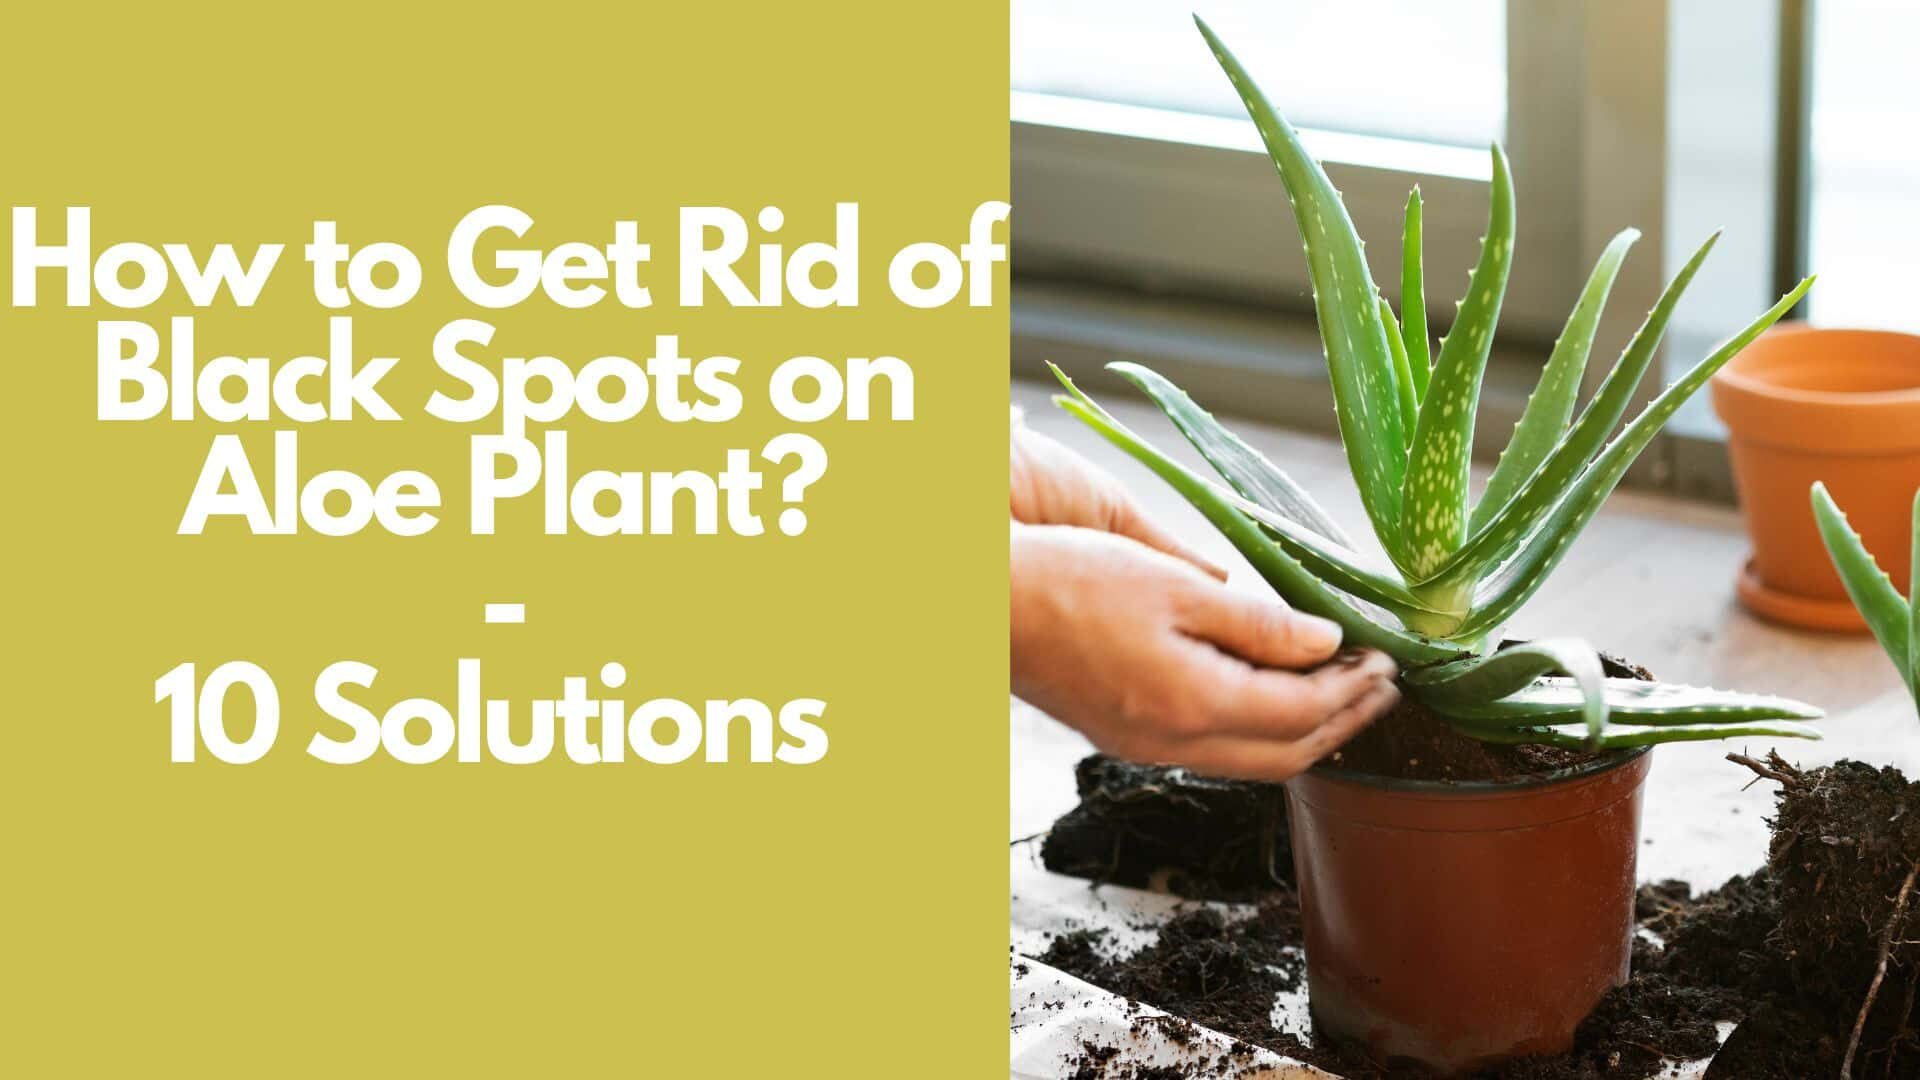 How to Get Rid of Black Spots on Aloe Plant: 10 Solutions  